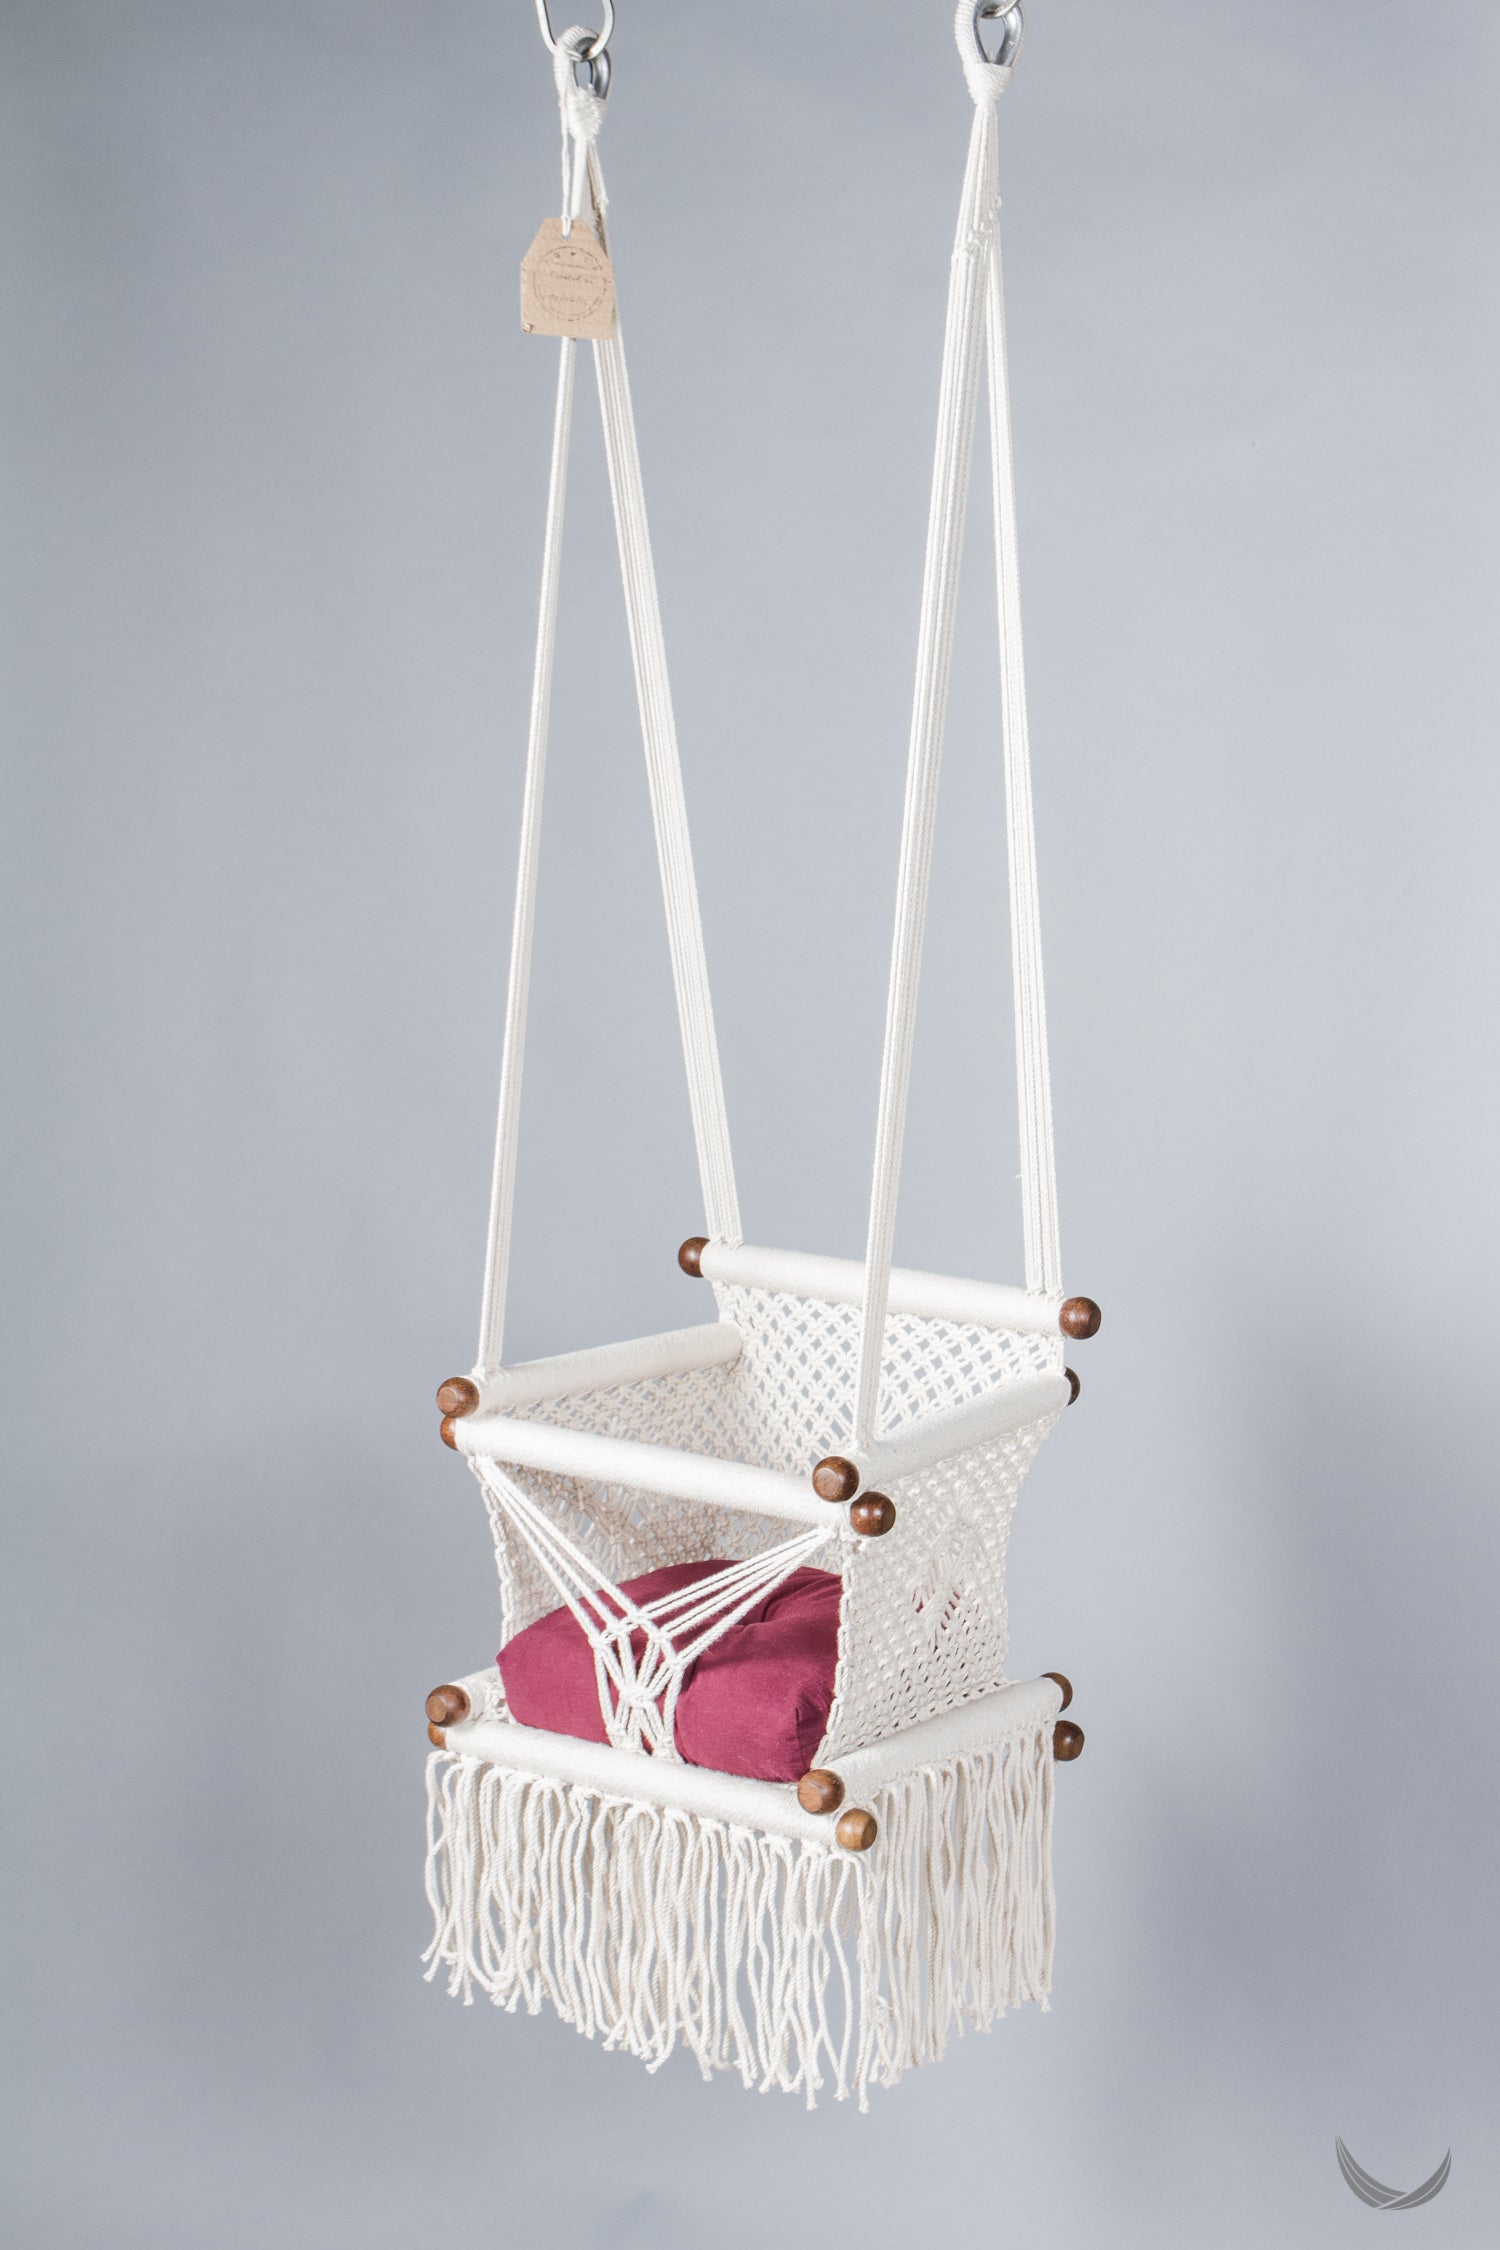 ivory color baby swing chair with a red color pad